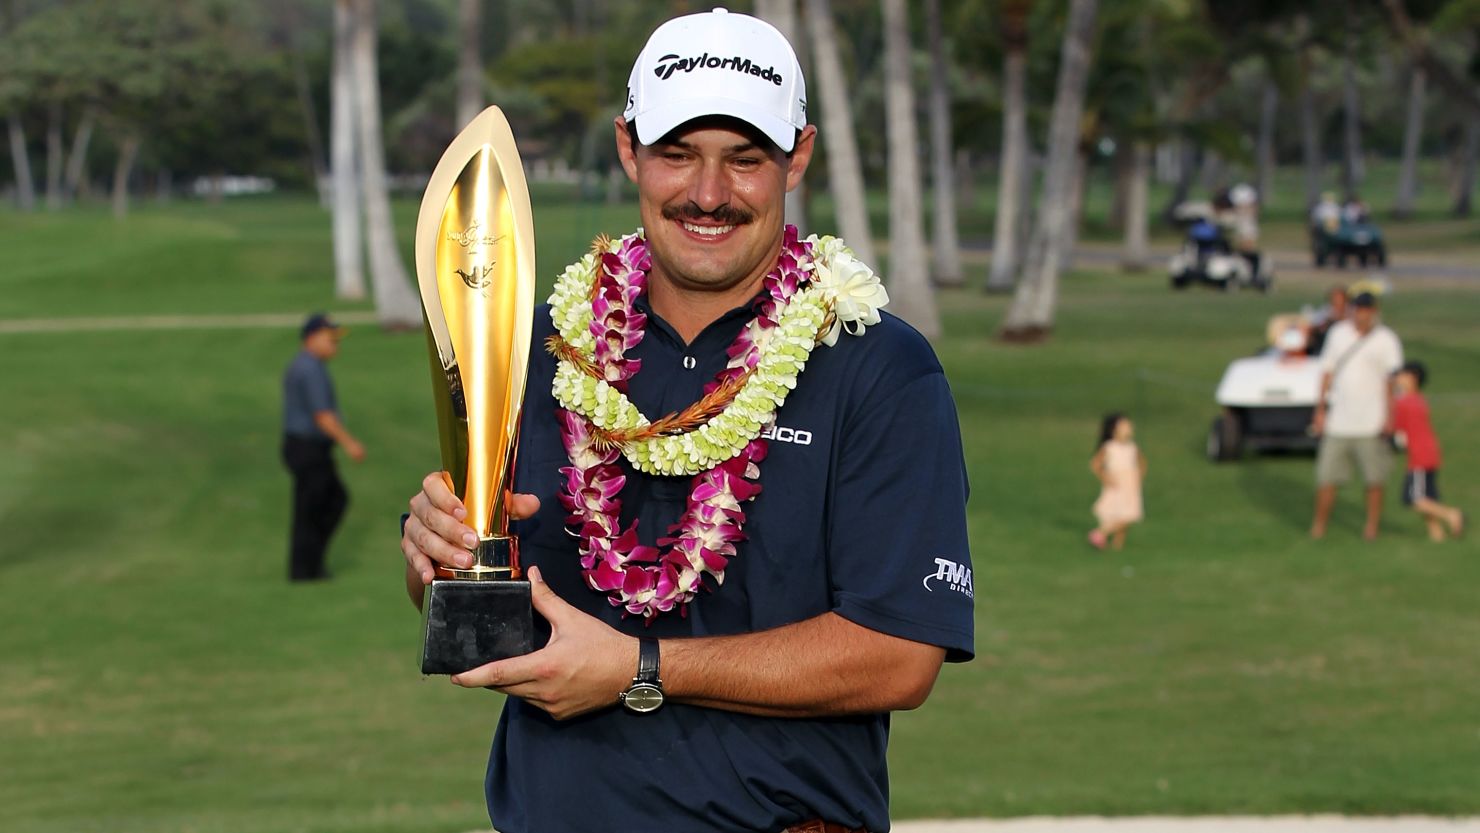 Johnson Wagner, sporting his mustache, celebrates after winning his third PGA Tour title.